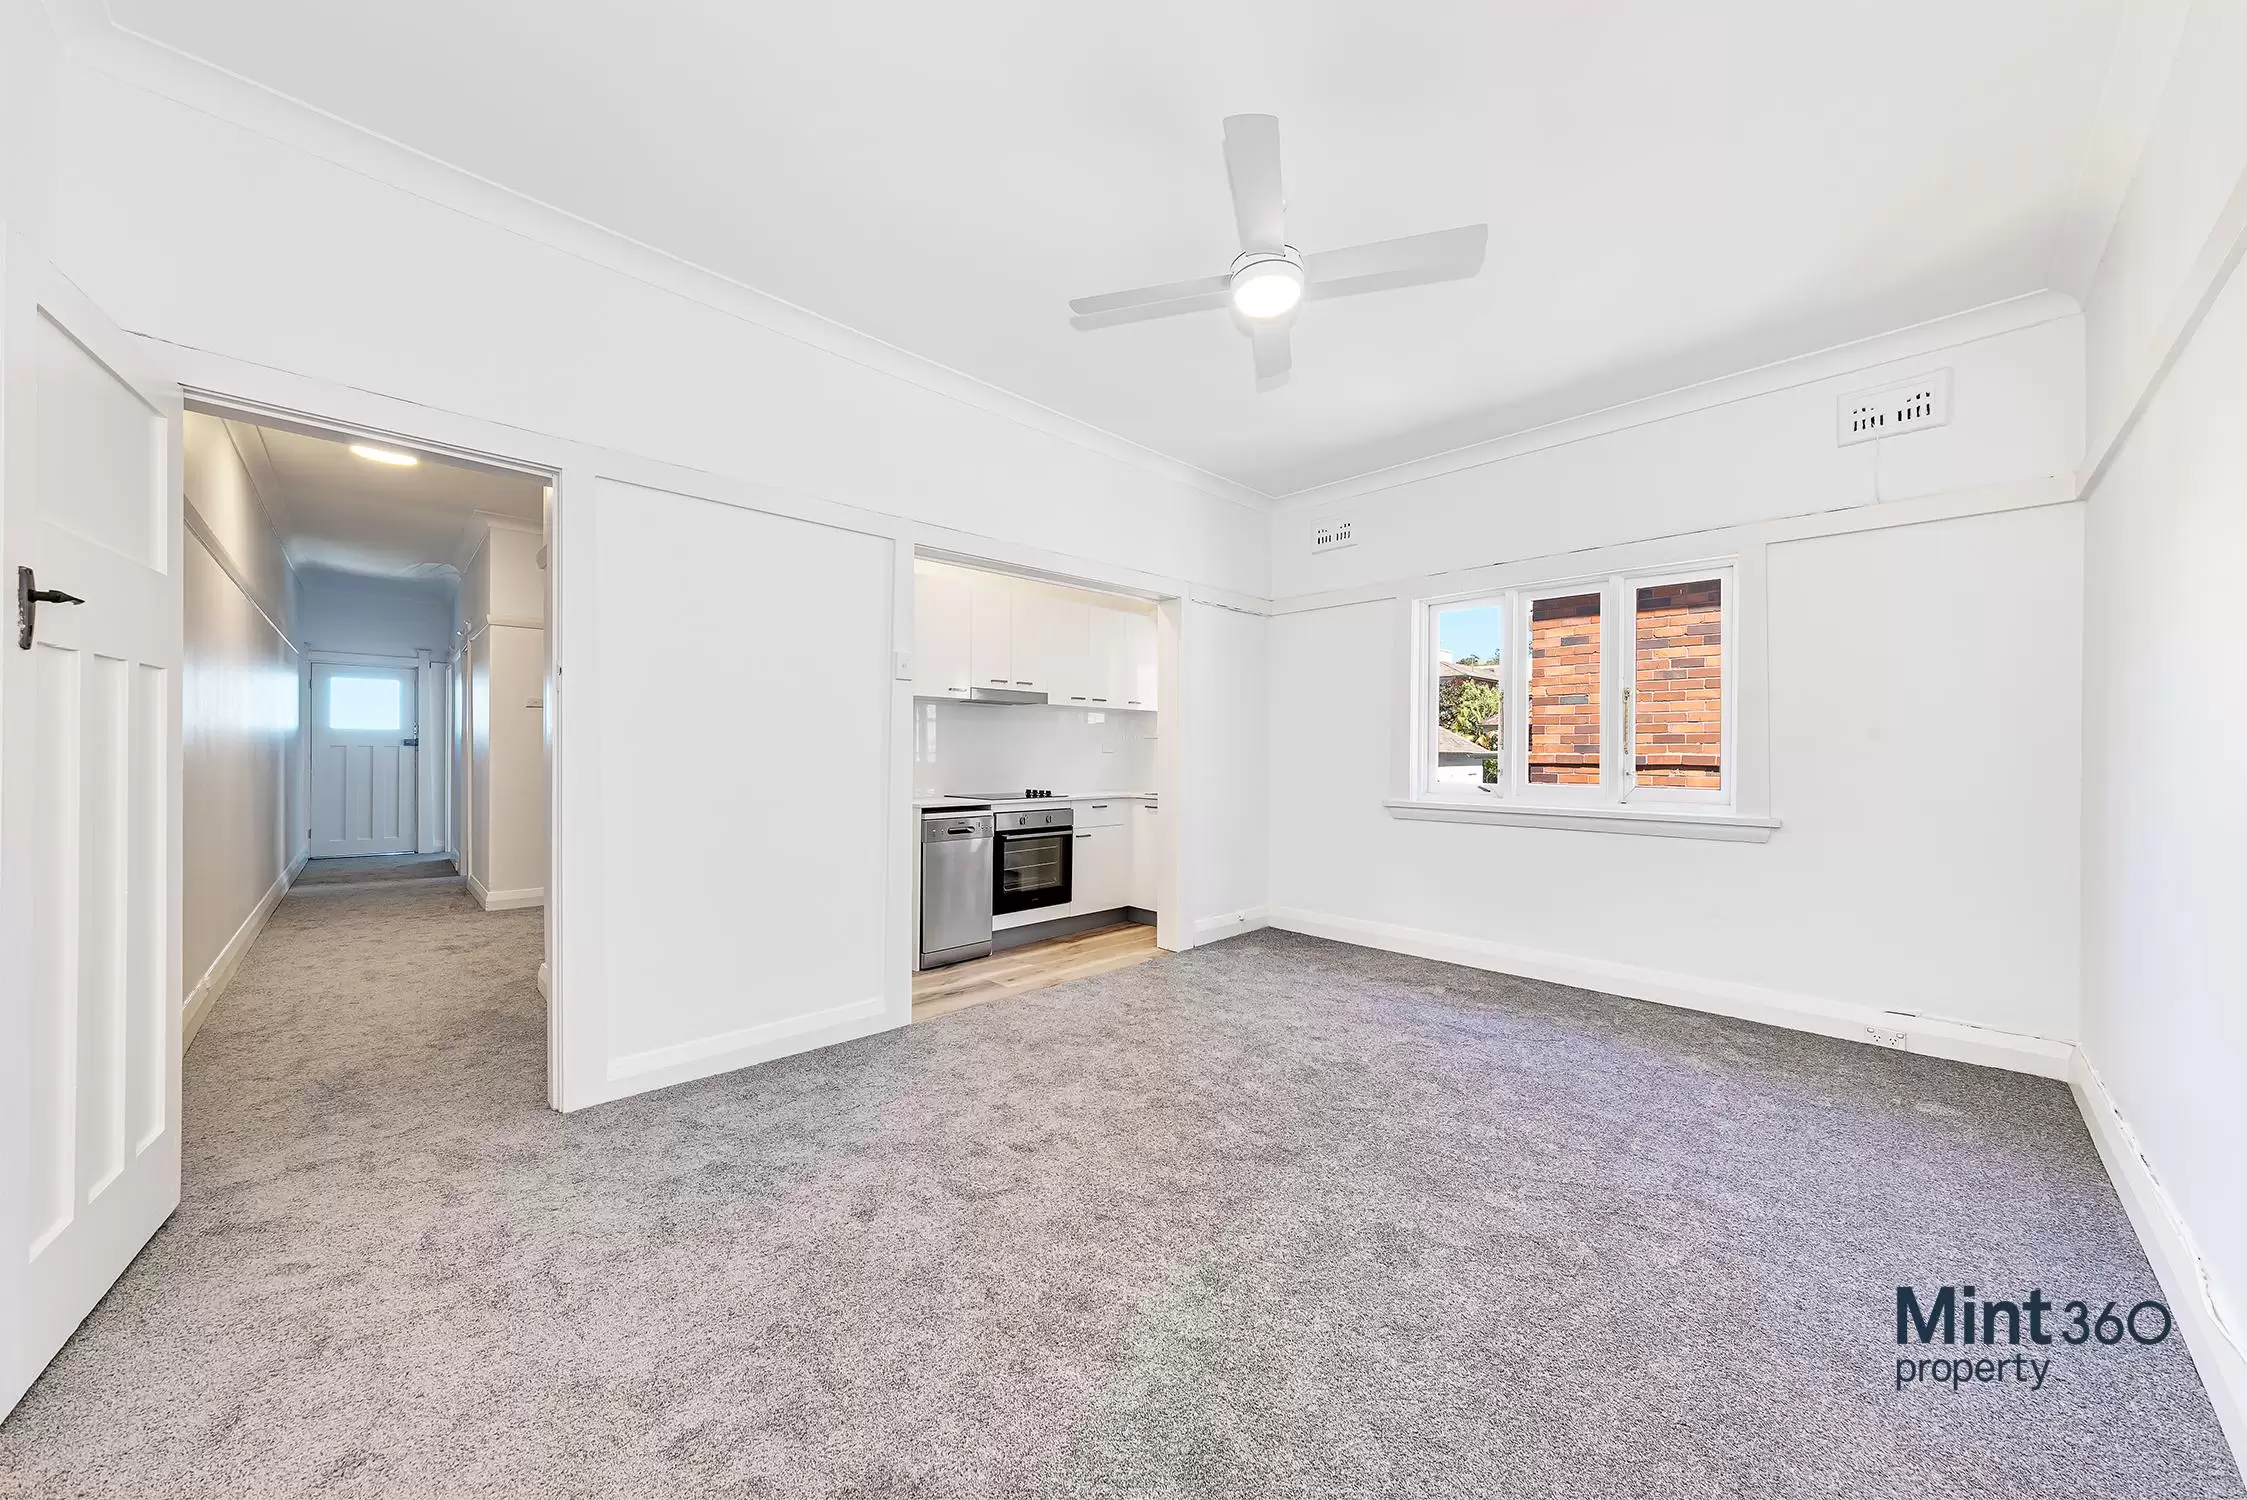 14/289 Arden Street, Coogee Leased by Raine & Horne Randwick | Coogee - image 2